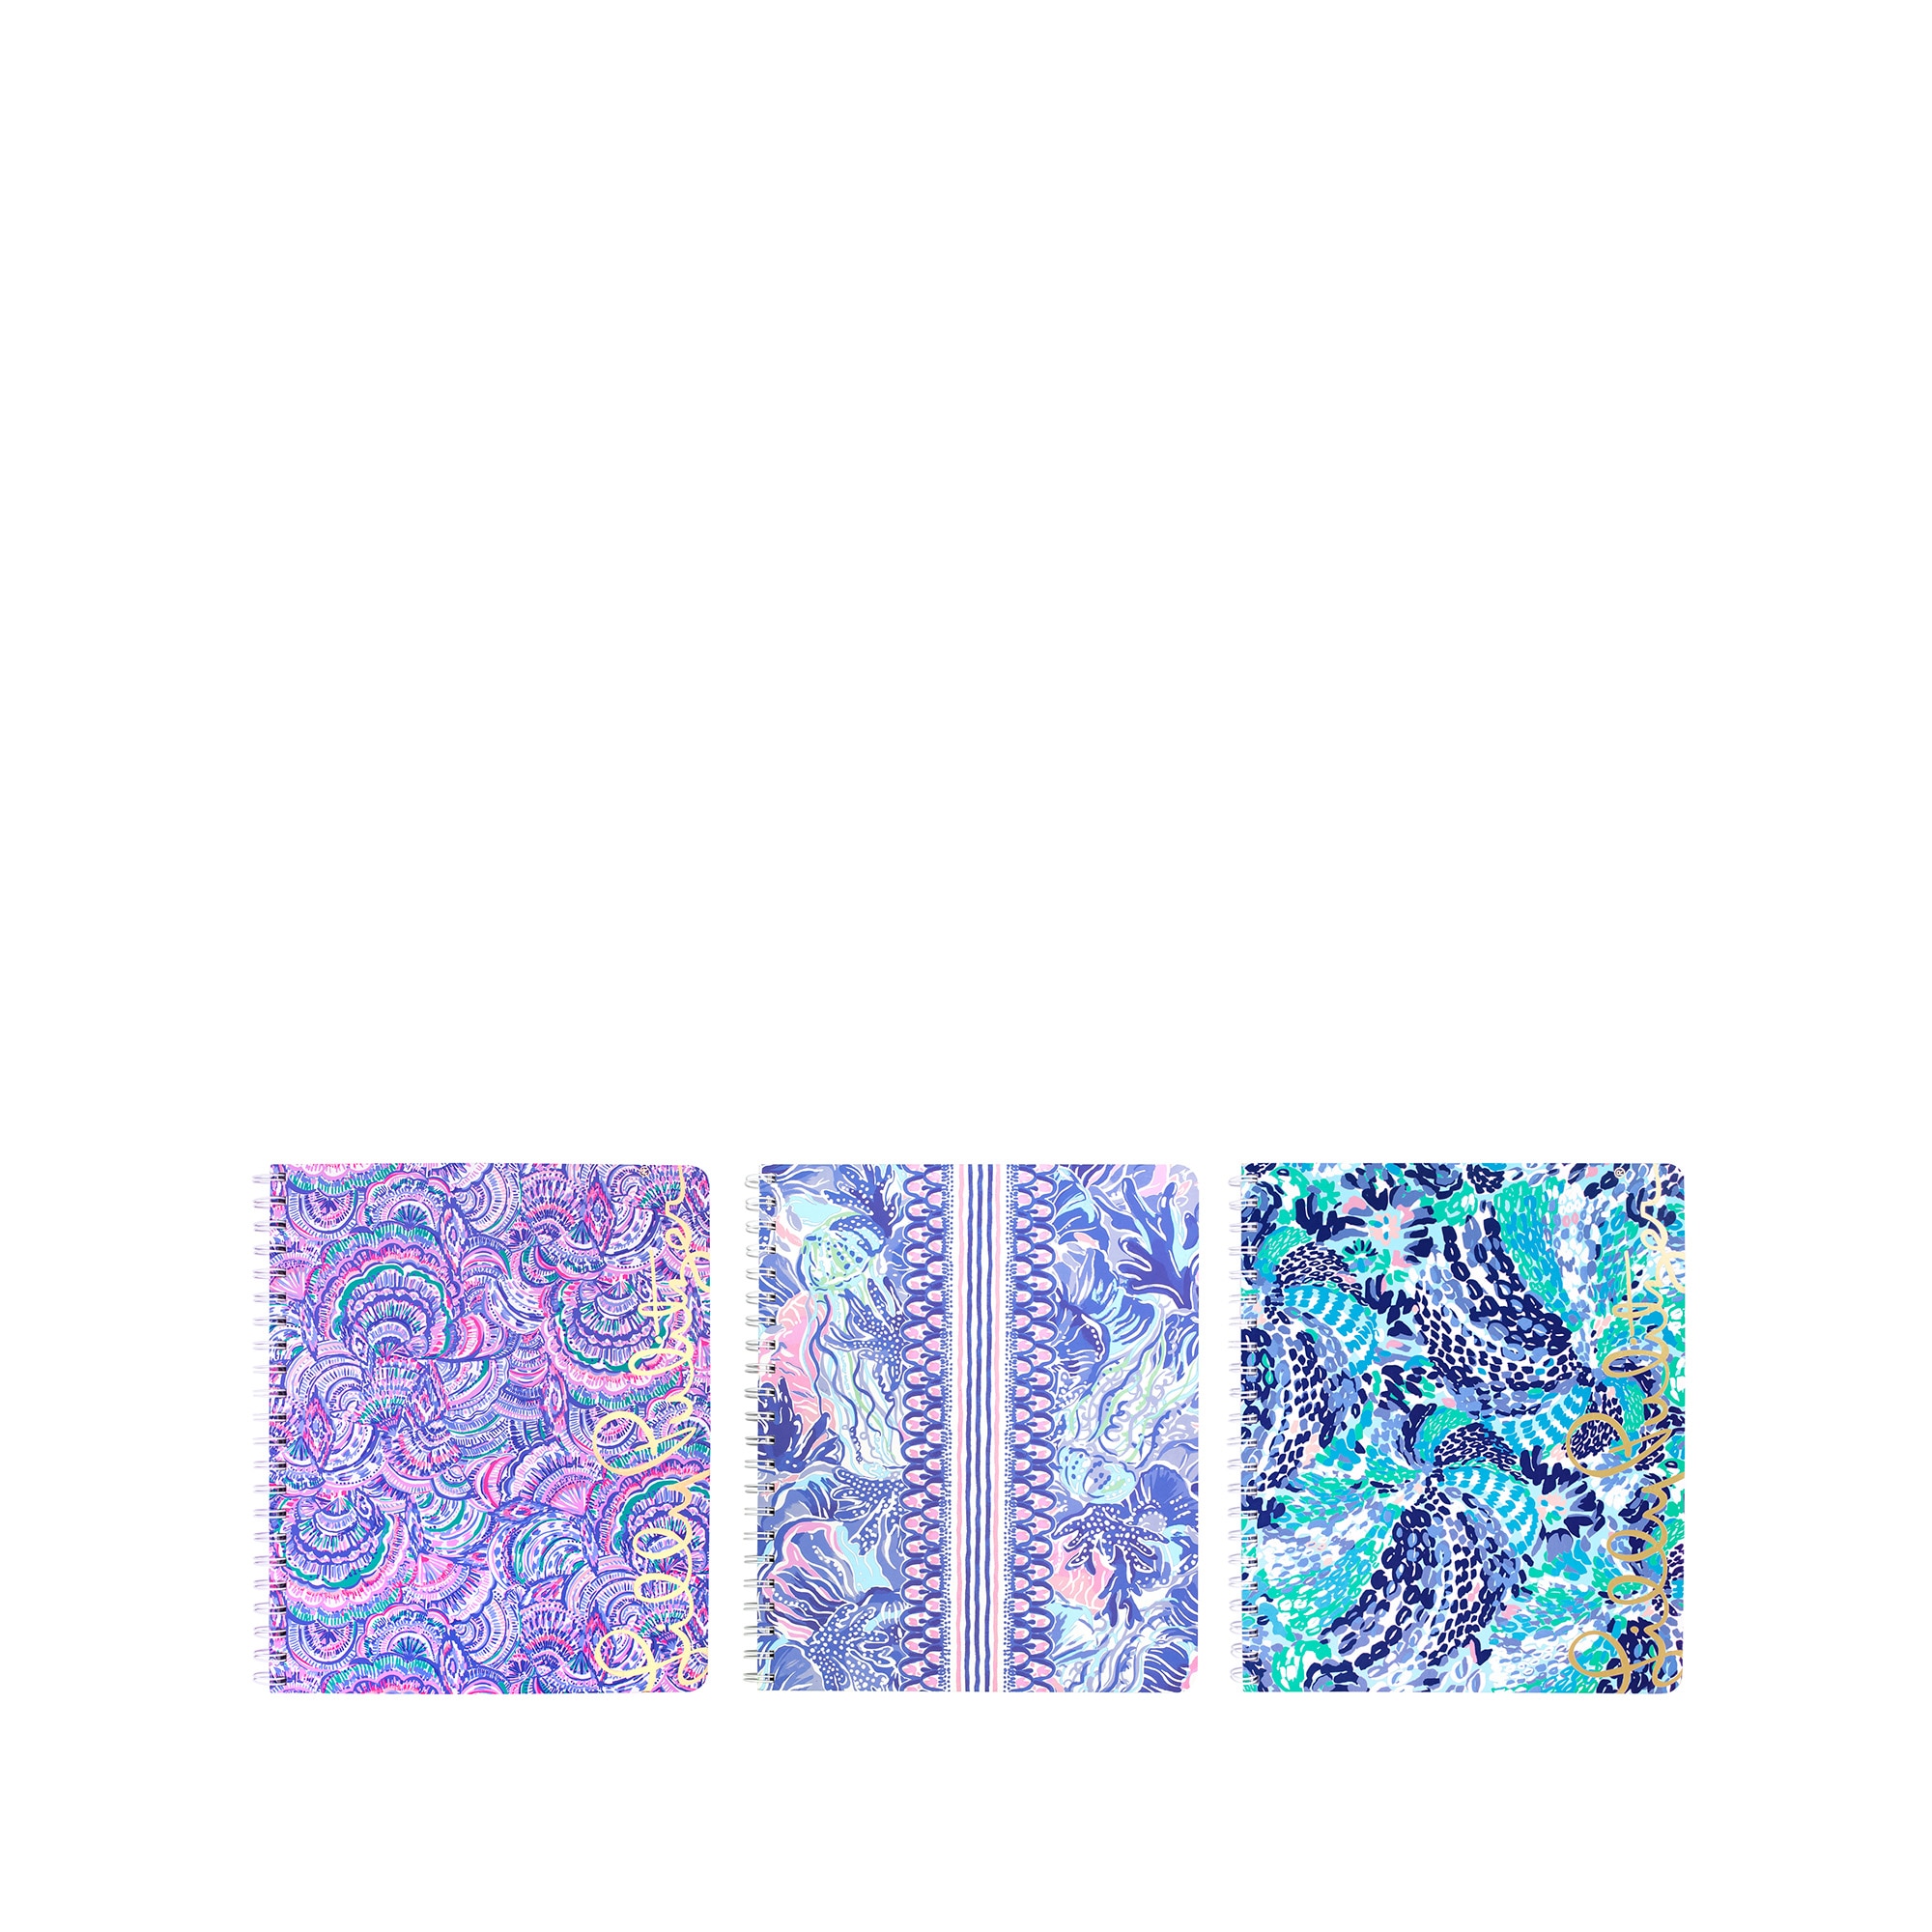 Lilly Pulitzer Large Notebook Set of 3, Happy As/Shade/Wave